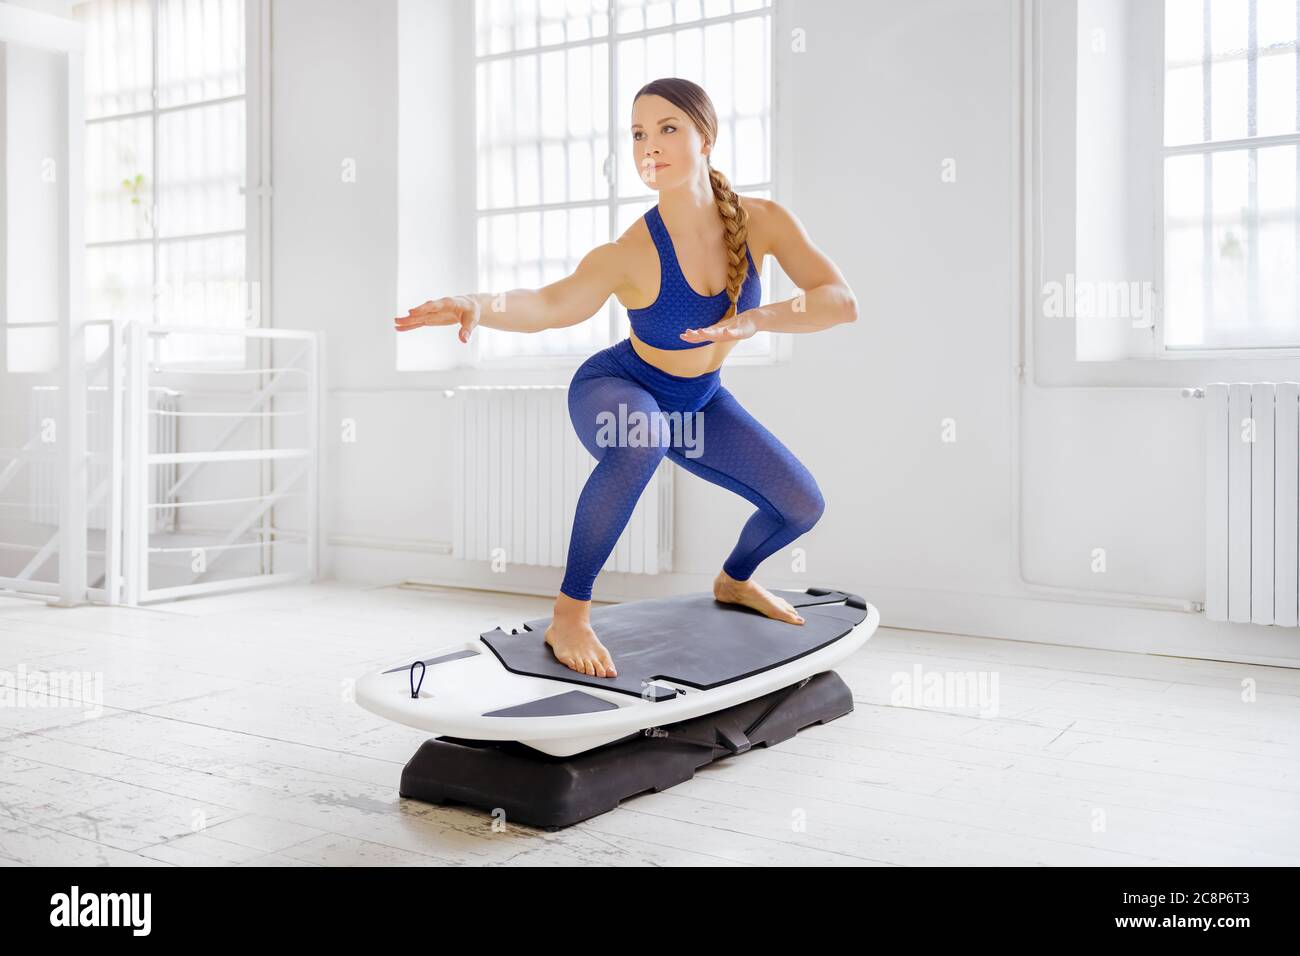 Young woman doing a surfset regular surfer pose during her fitness workout in a high key gym with copyspace in a healthy lifestyle concept Stock Photo